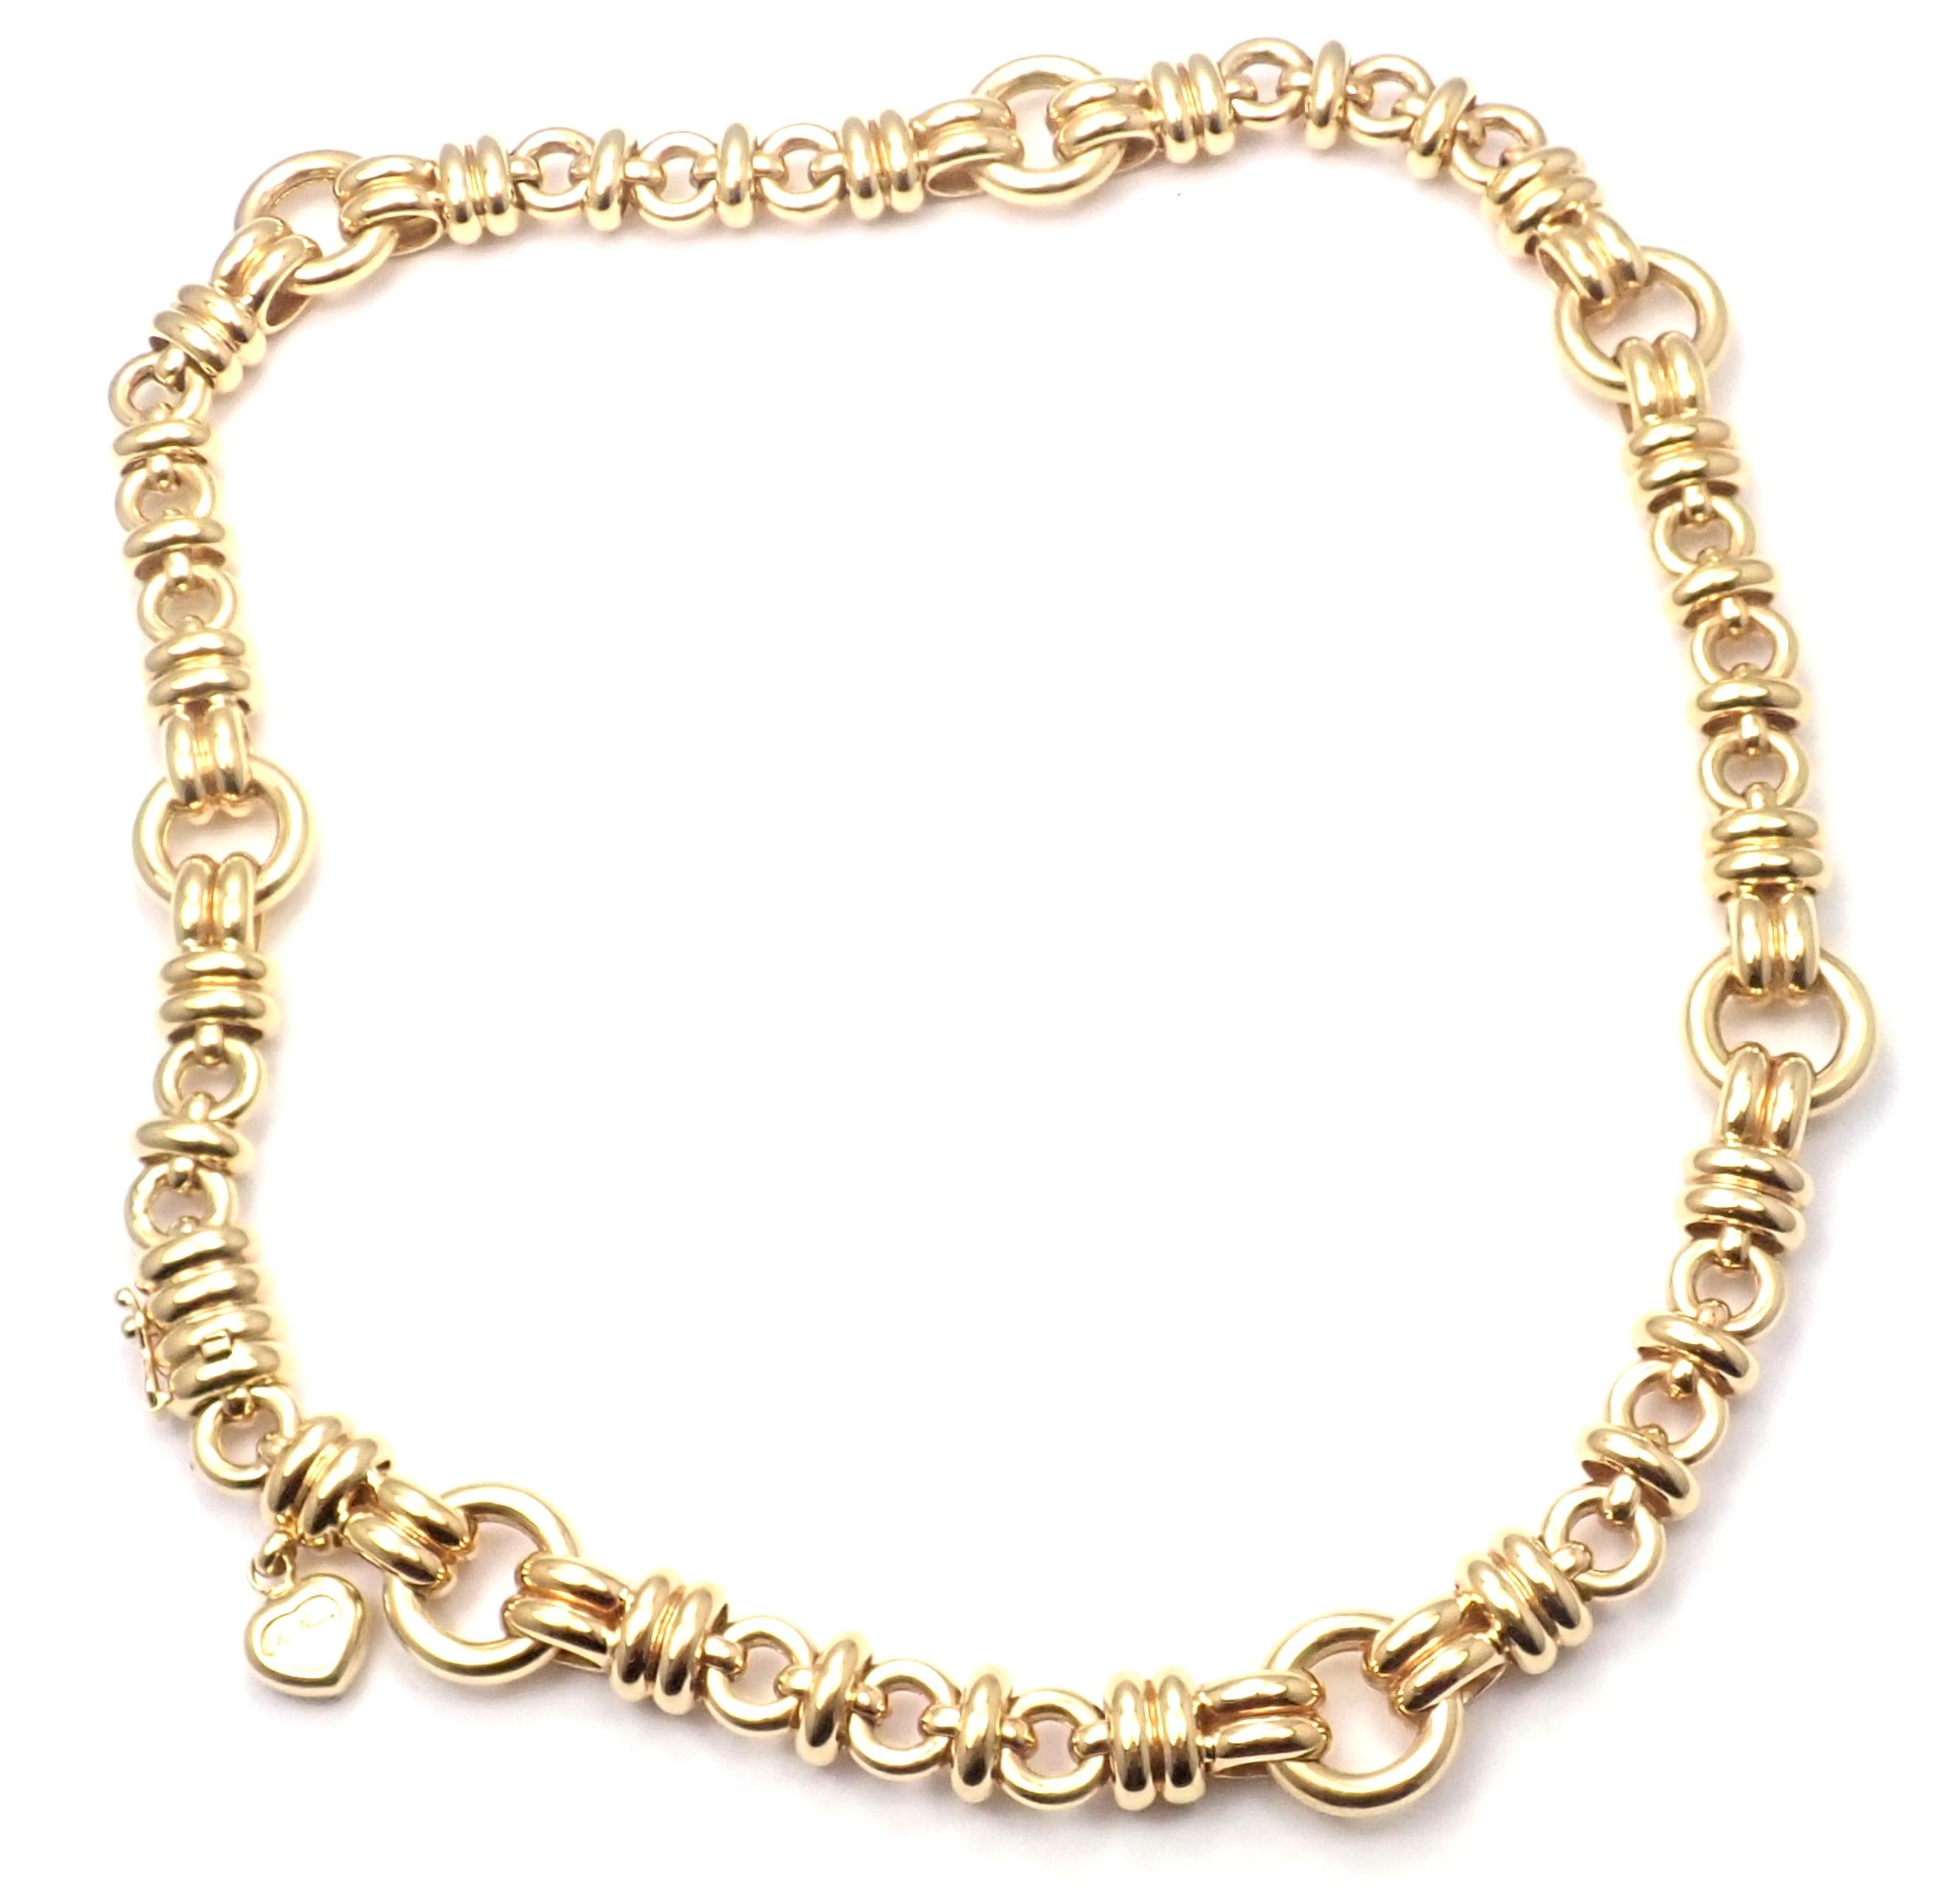 18k Yellow Gold Les Chaines Link Necklace by Chopard. 
Details: 
Length:  16.75